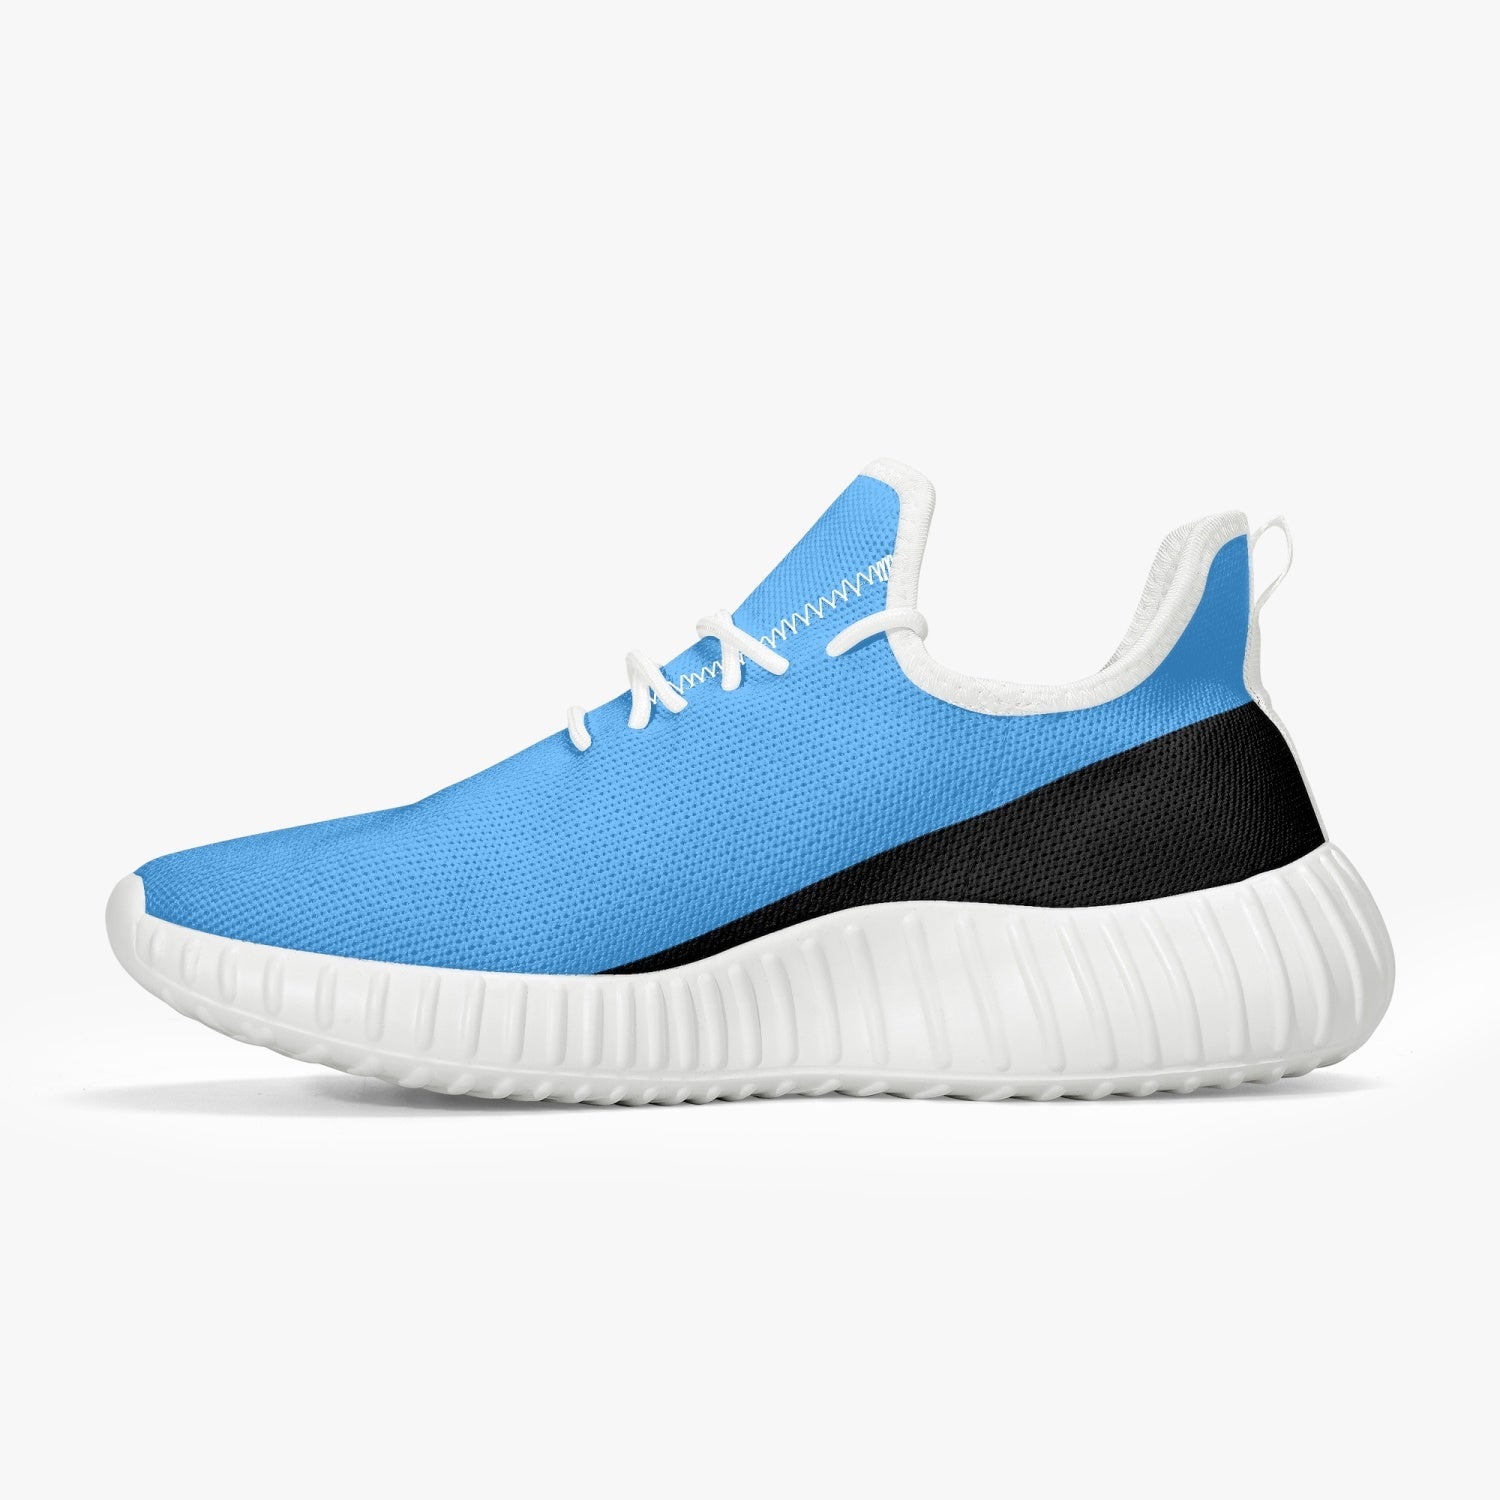 Officially Sexy Baby Blue & Black Laser Mesh Knit Sneakers - With White or Black Sole